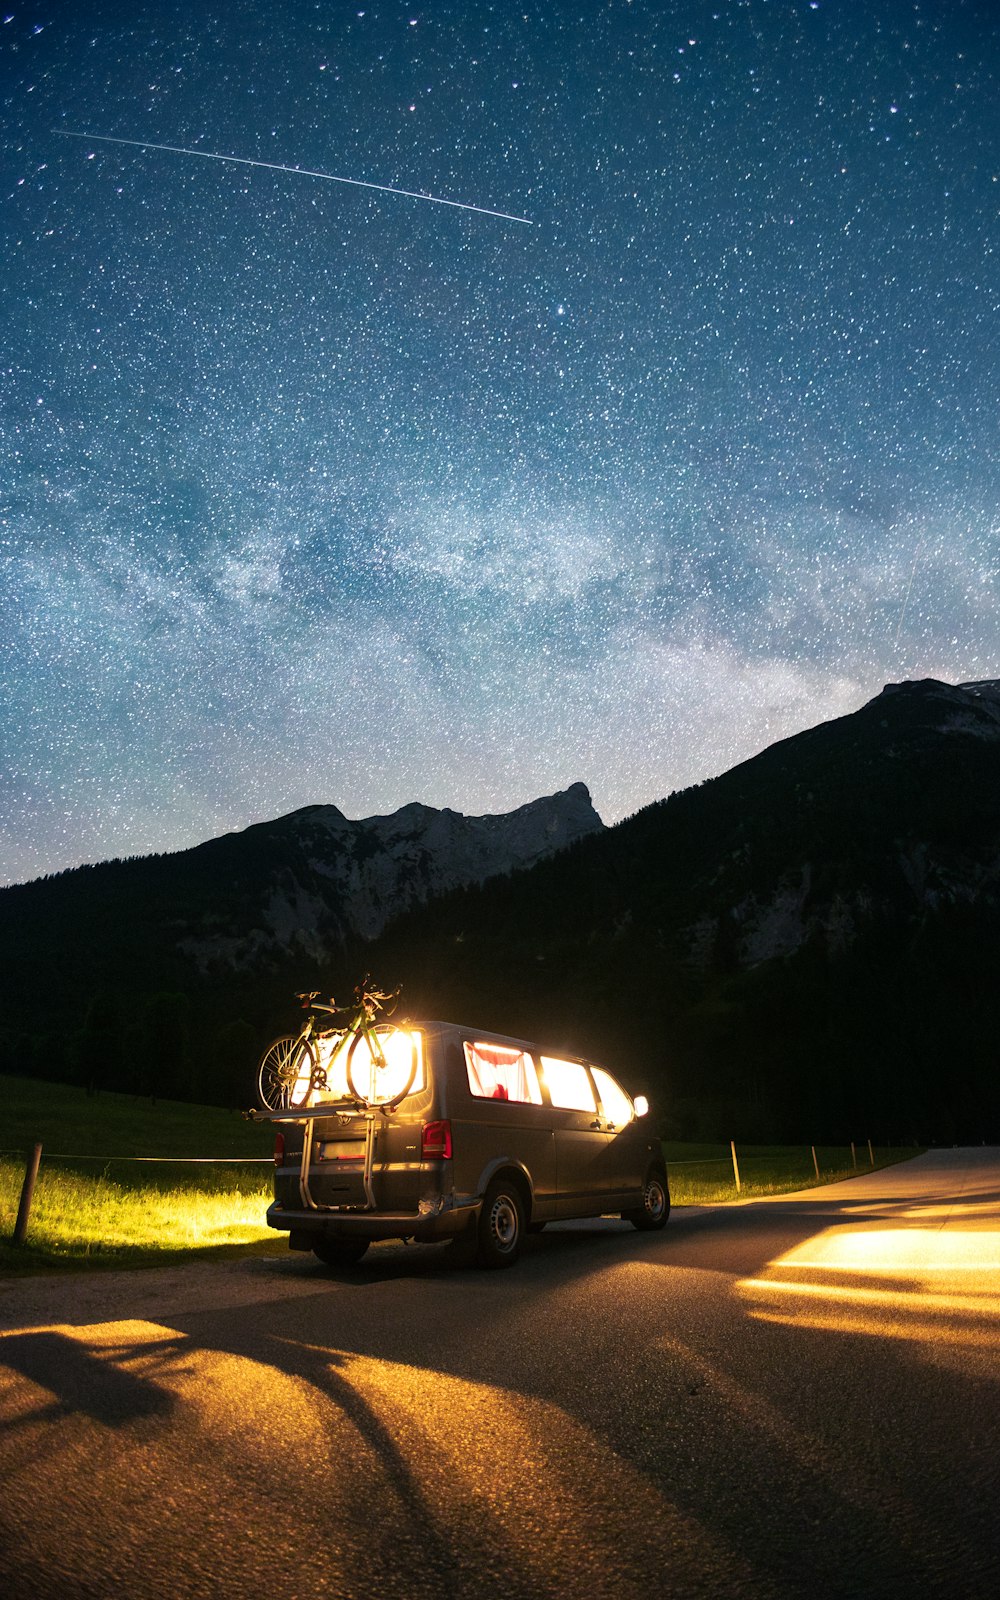 a van parked on the side of a road under a night sky